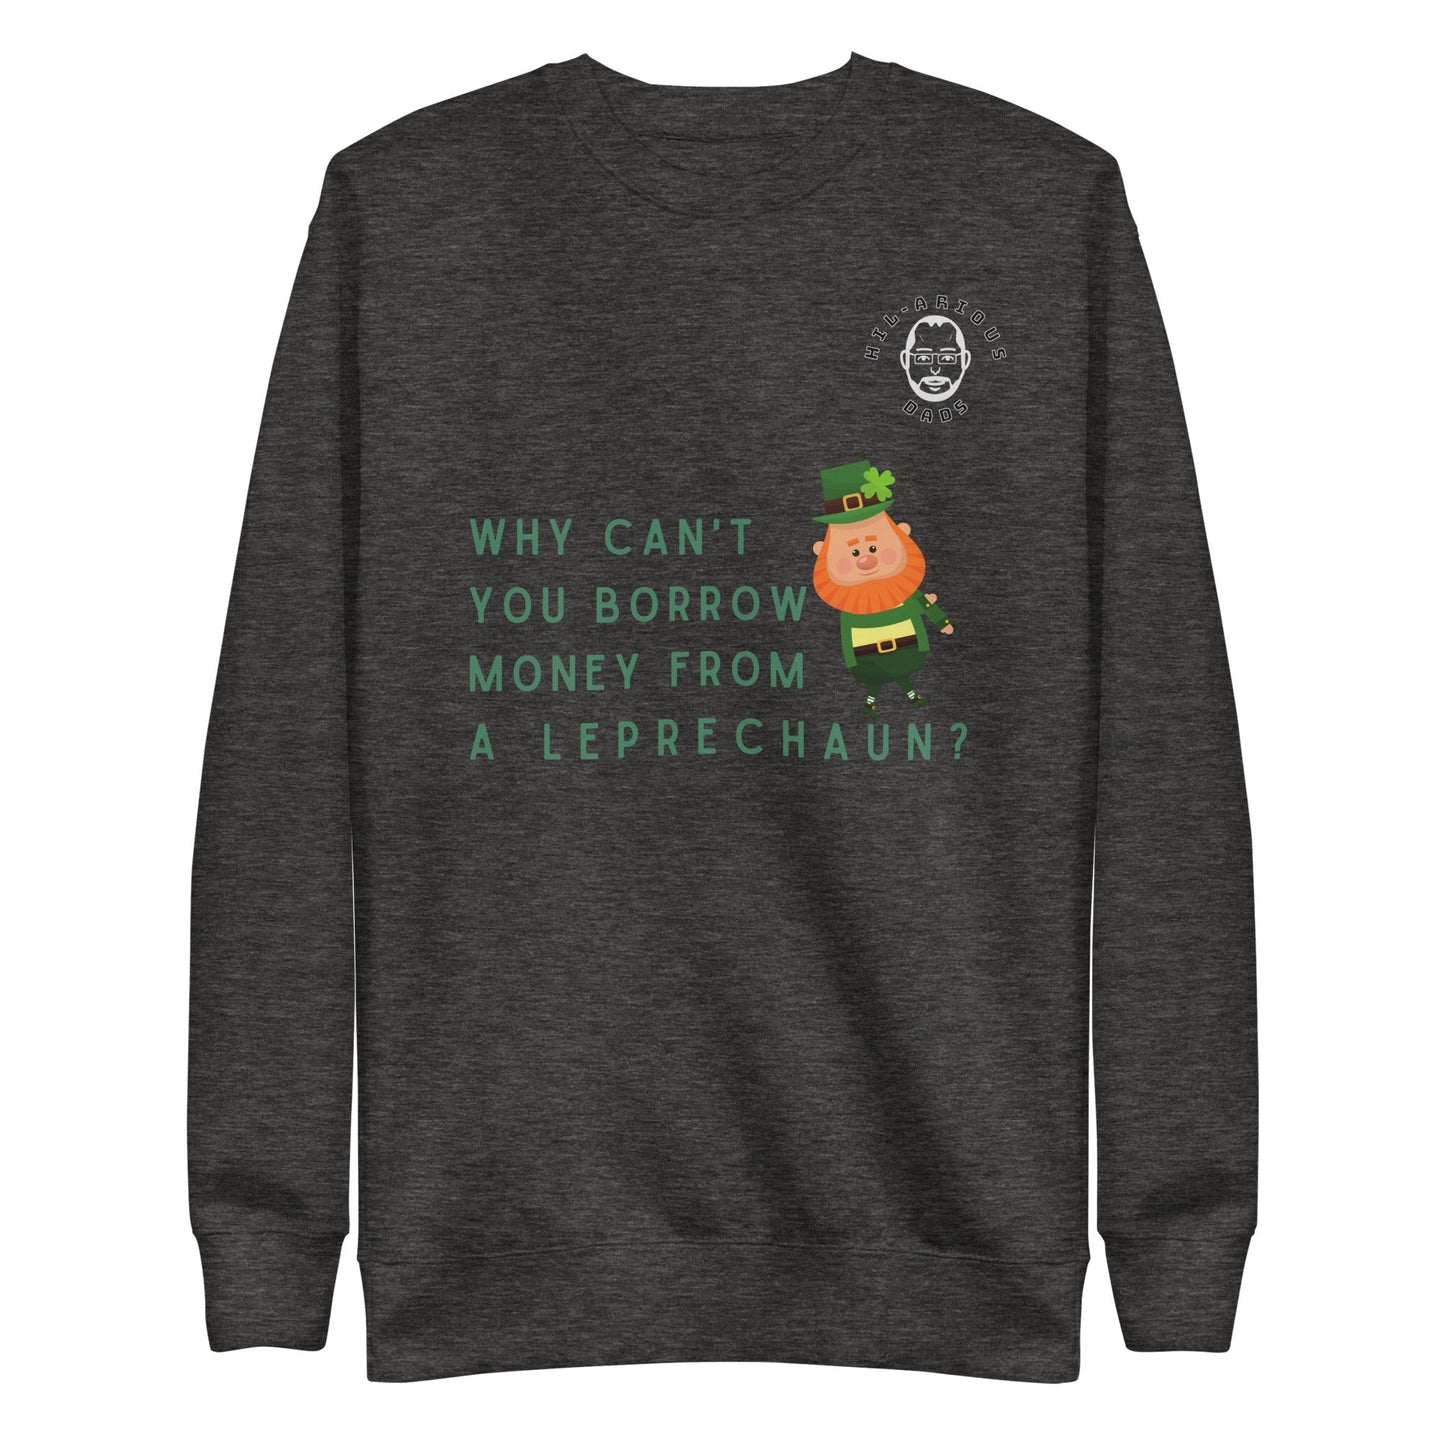 Why can't you borrow money from a leprechaun?-Sweatshirt - Hil-arious Dads